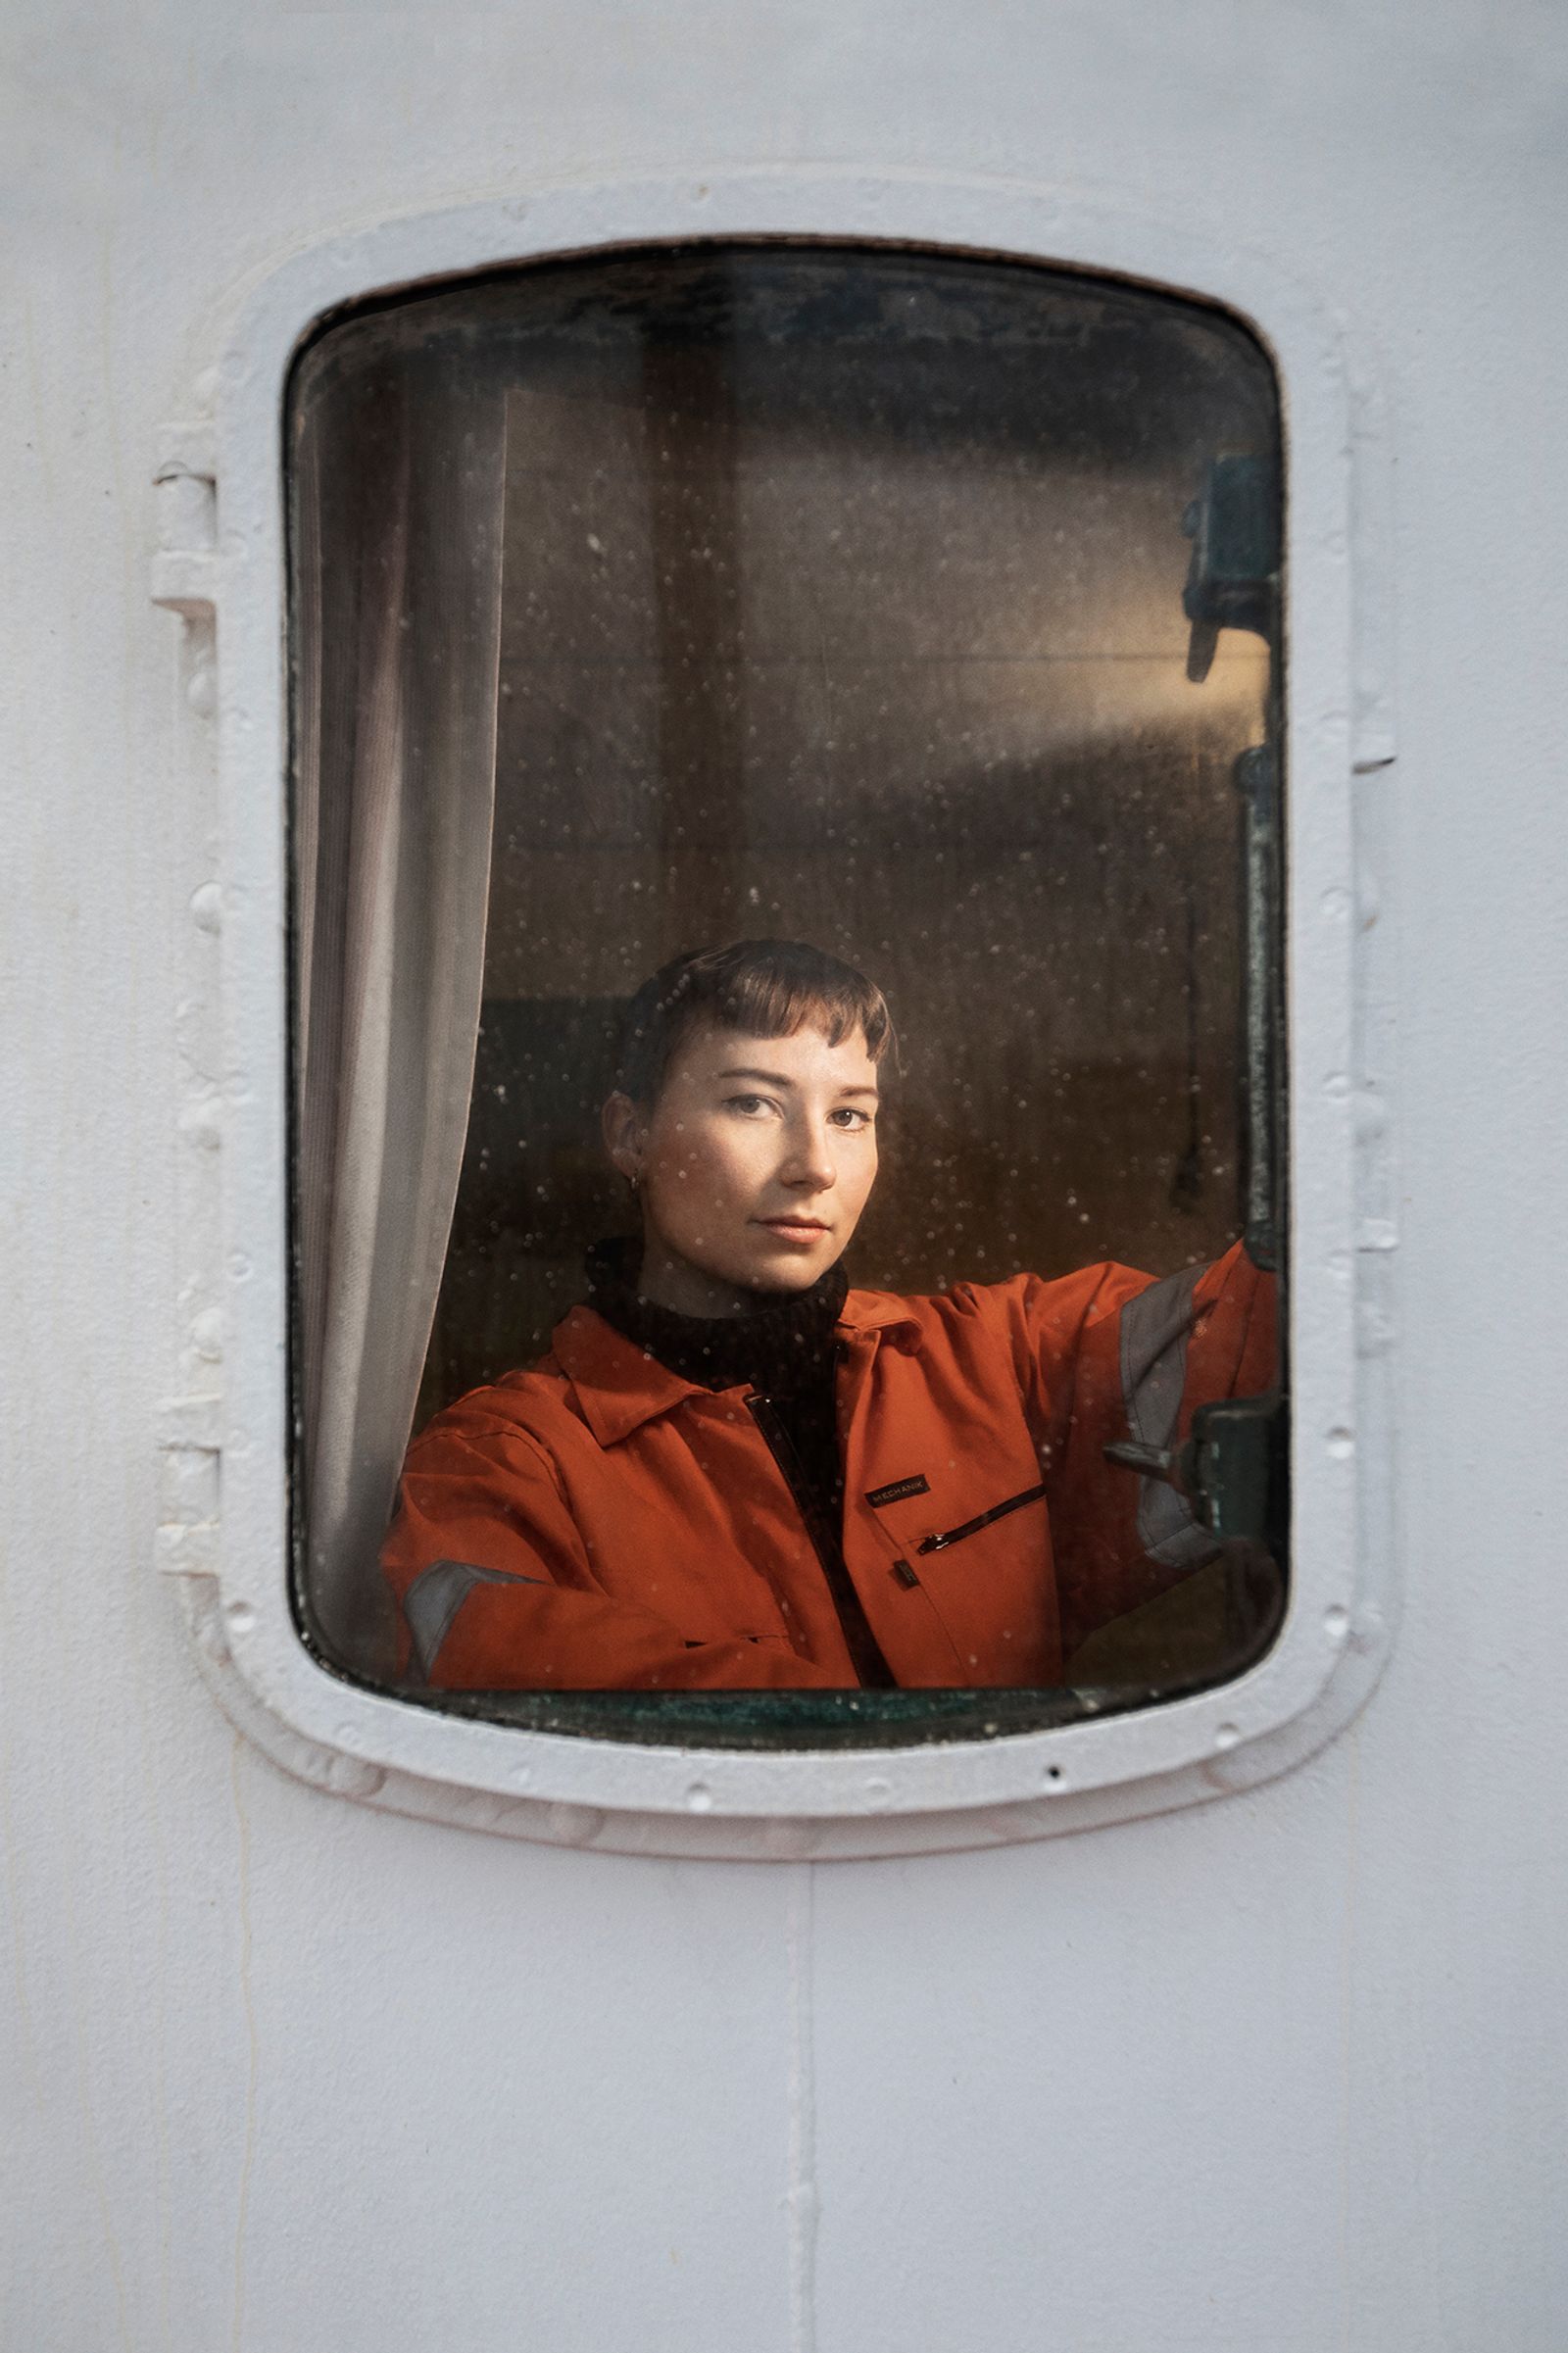 © Nina Varumo - Image from the Women at Sea - breaking waves photography project